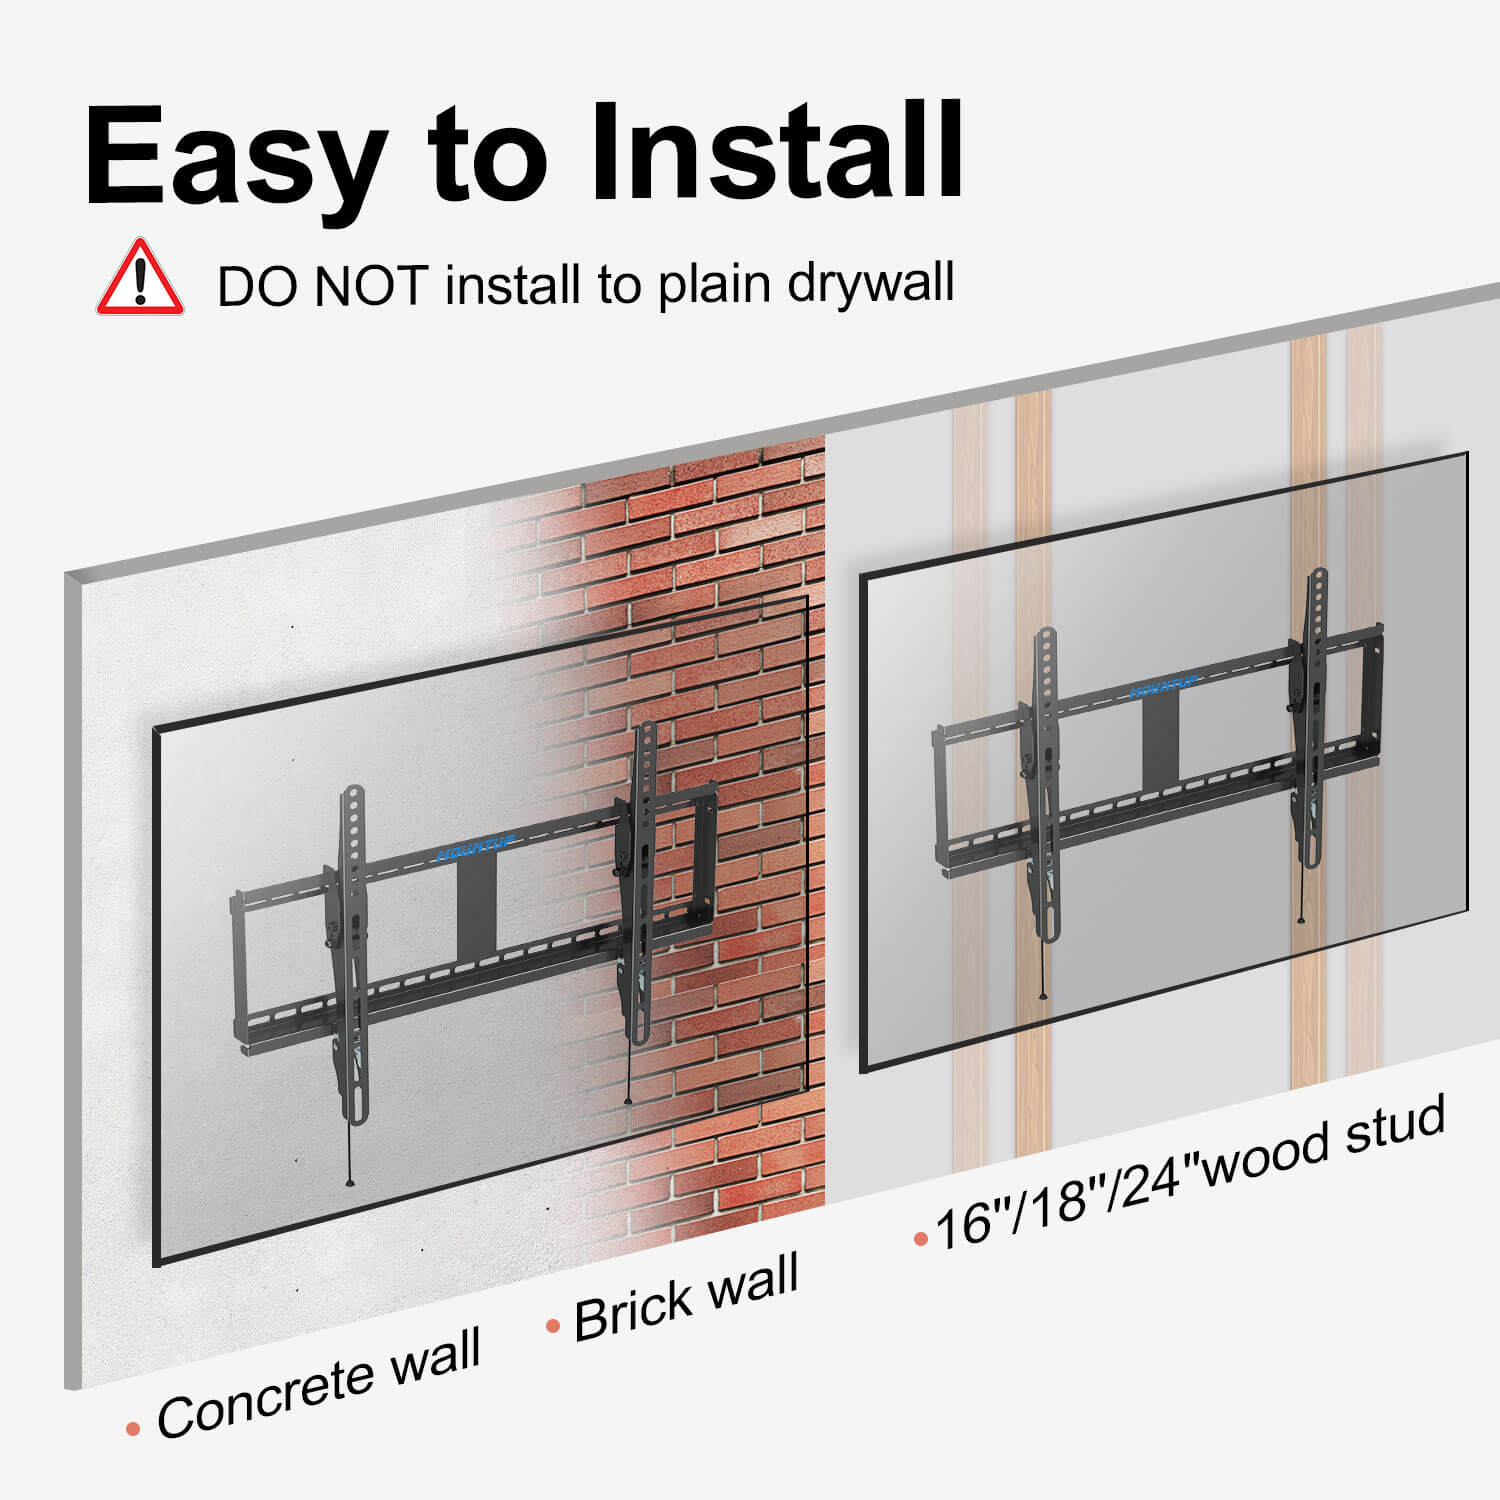 easy to install this wall mount for TV on concrete/brick wall and wood studs